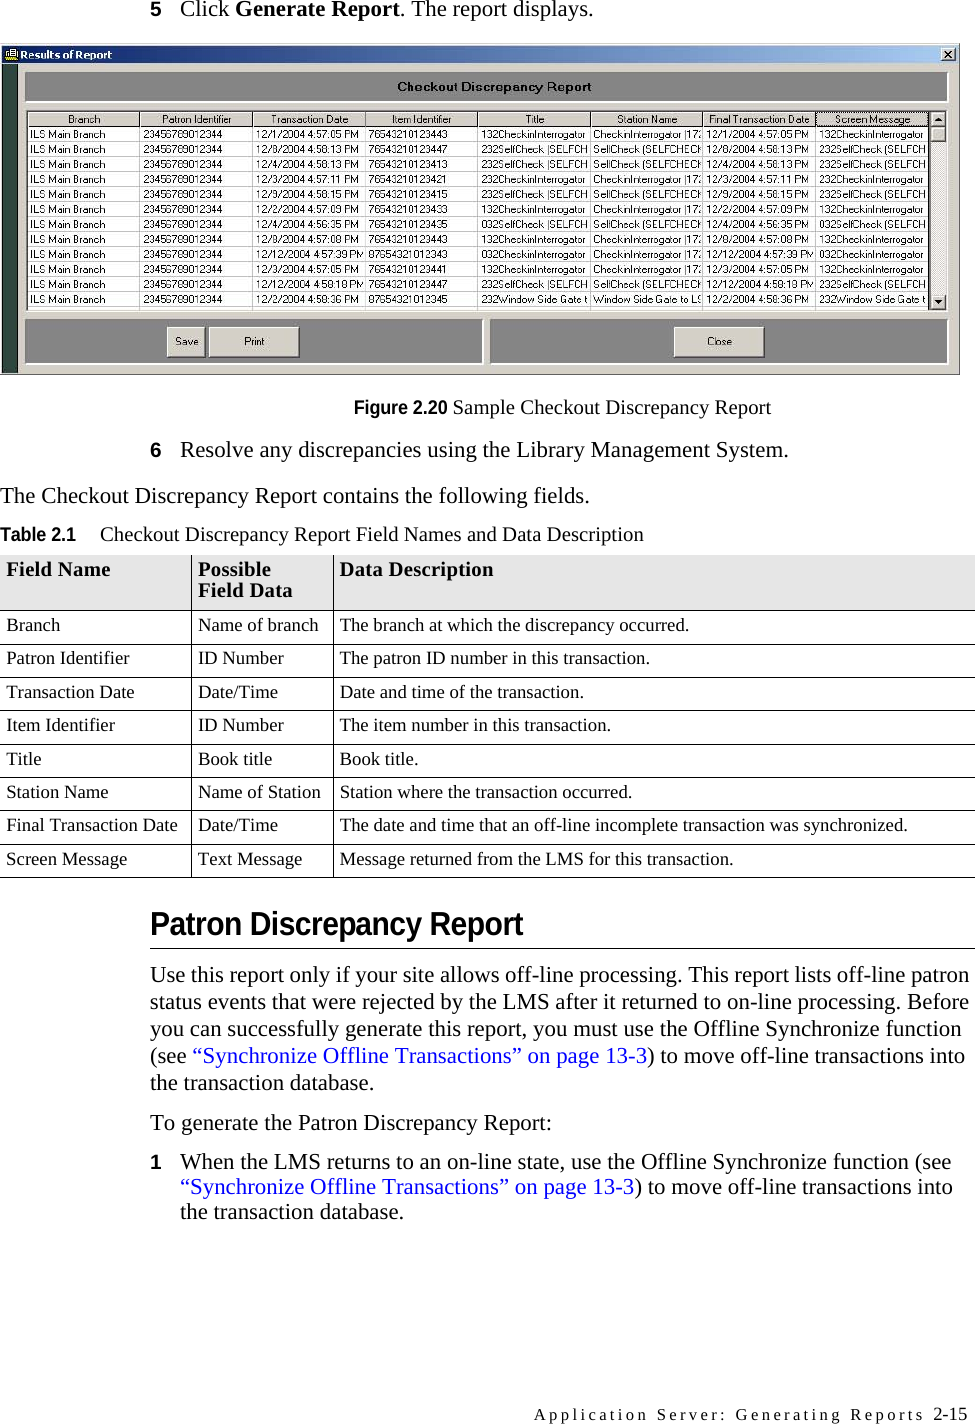 Application Server: Generating Reports 2-155Click Generate Report. The report displays.Figure 2.20 Sample Checkout Discrepancy Report6Resolve any discrepancies using the Library Management System. Patron Discrepancy ReportUse this report only if your site allows off-line processing. This report lists off-line patron status events that were rejected by the LMS after it returned to on-line processing. Before you can successfully generate this report, you must use the Offline Synchronize function (see “Synchronize Offline Transactions” on page 13-3) to move off-line transactions into the transaction database. To generate the Patron Discrepancy Report:1When the LMS returns to an on-line state, use the Offline Synchronize function (see “Synchronize Offline Transactions” on page 13-3) to move off-line transactions into the transaction database.The Checkout Discrepancy Report contains the following fields.Table 2.1Checkout Discrepancy Report Field Names and Data DescriptionField Name Possible Field Data Data DescriptionBranch Name of branch The branch at which the discrepancy occurred.Patron Identifier ID Number The patron ID number in this transaction.Transaction Date Date/Time Date and time of the transaction.Item Identifier ID Number The item number in this transaction.Title Book title Book title.Station Name Name of Station Station where the transaction occurred.Final Transaction Date Date/Time The date and time that an off-line incomplete transaction was synchronized.Screen Message Text Message Message returned from the LMS for this transaction.